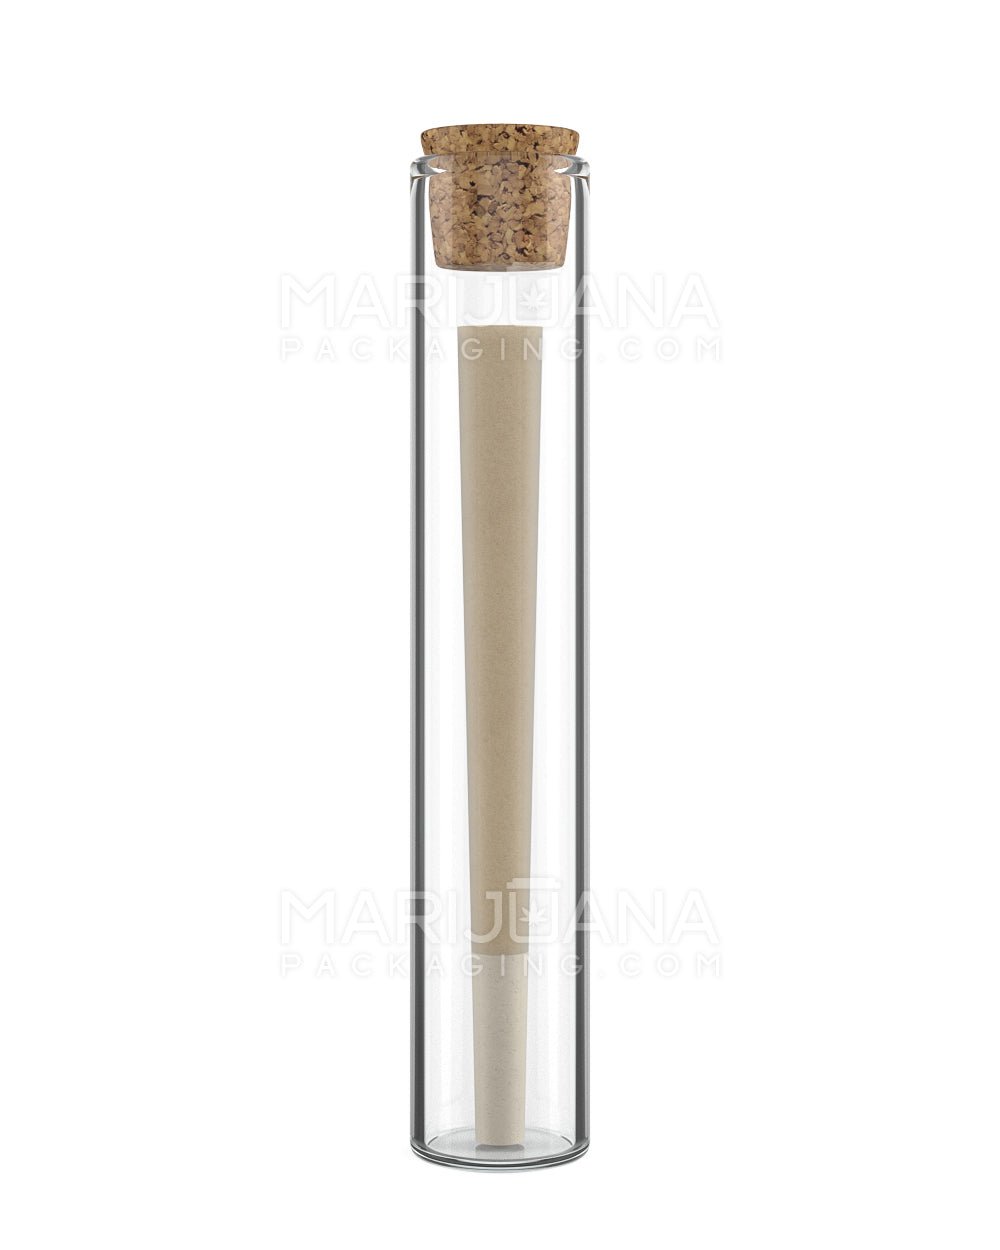 Glass Pre-Roll Tube with Cork Top | 120mm - Clear Glass - 500 Count - 2